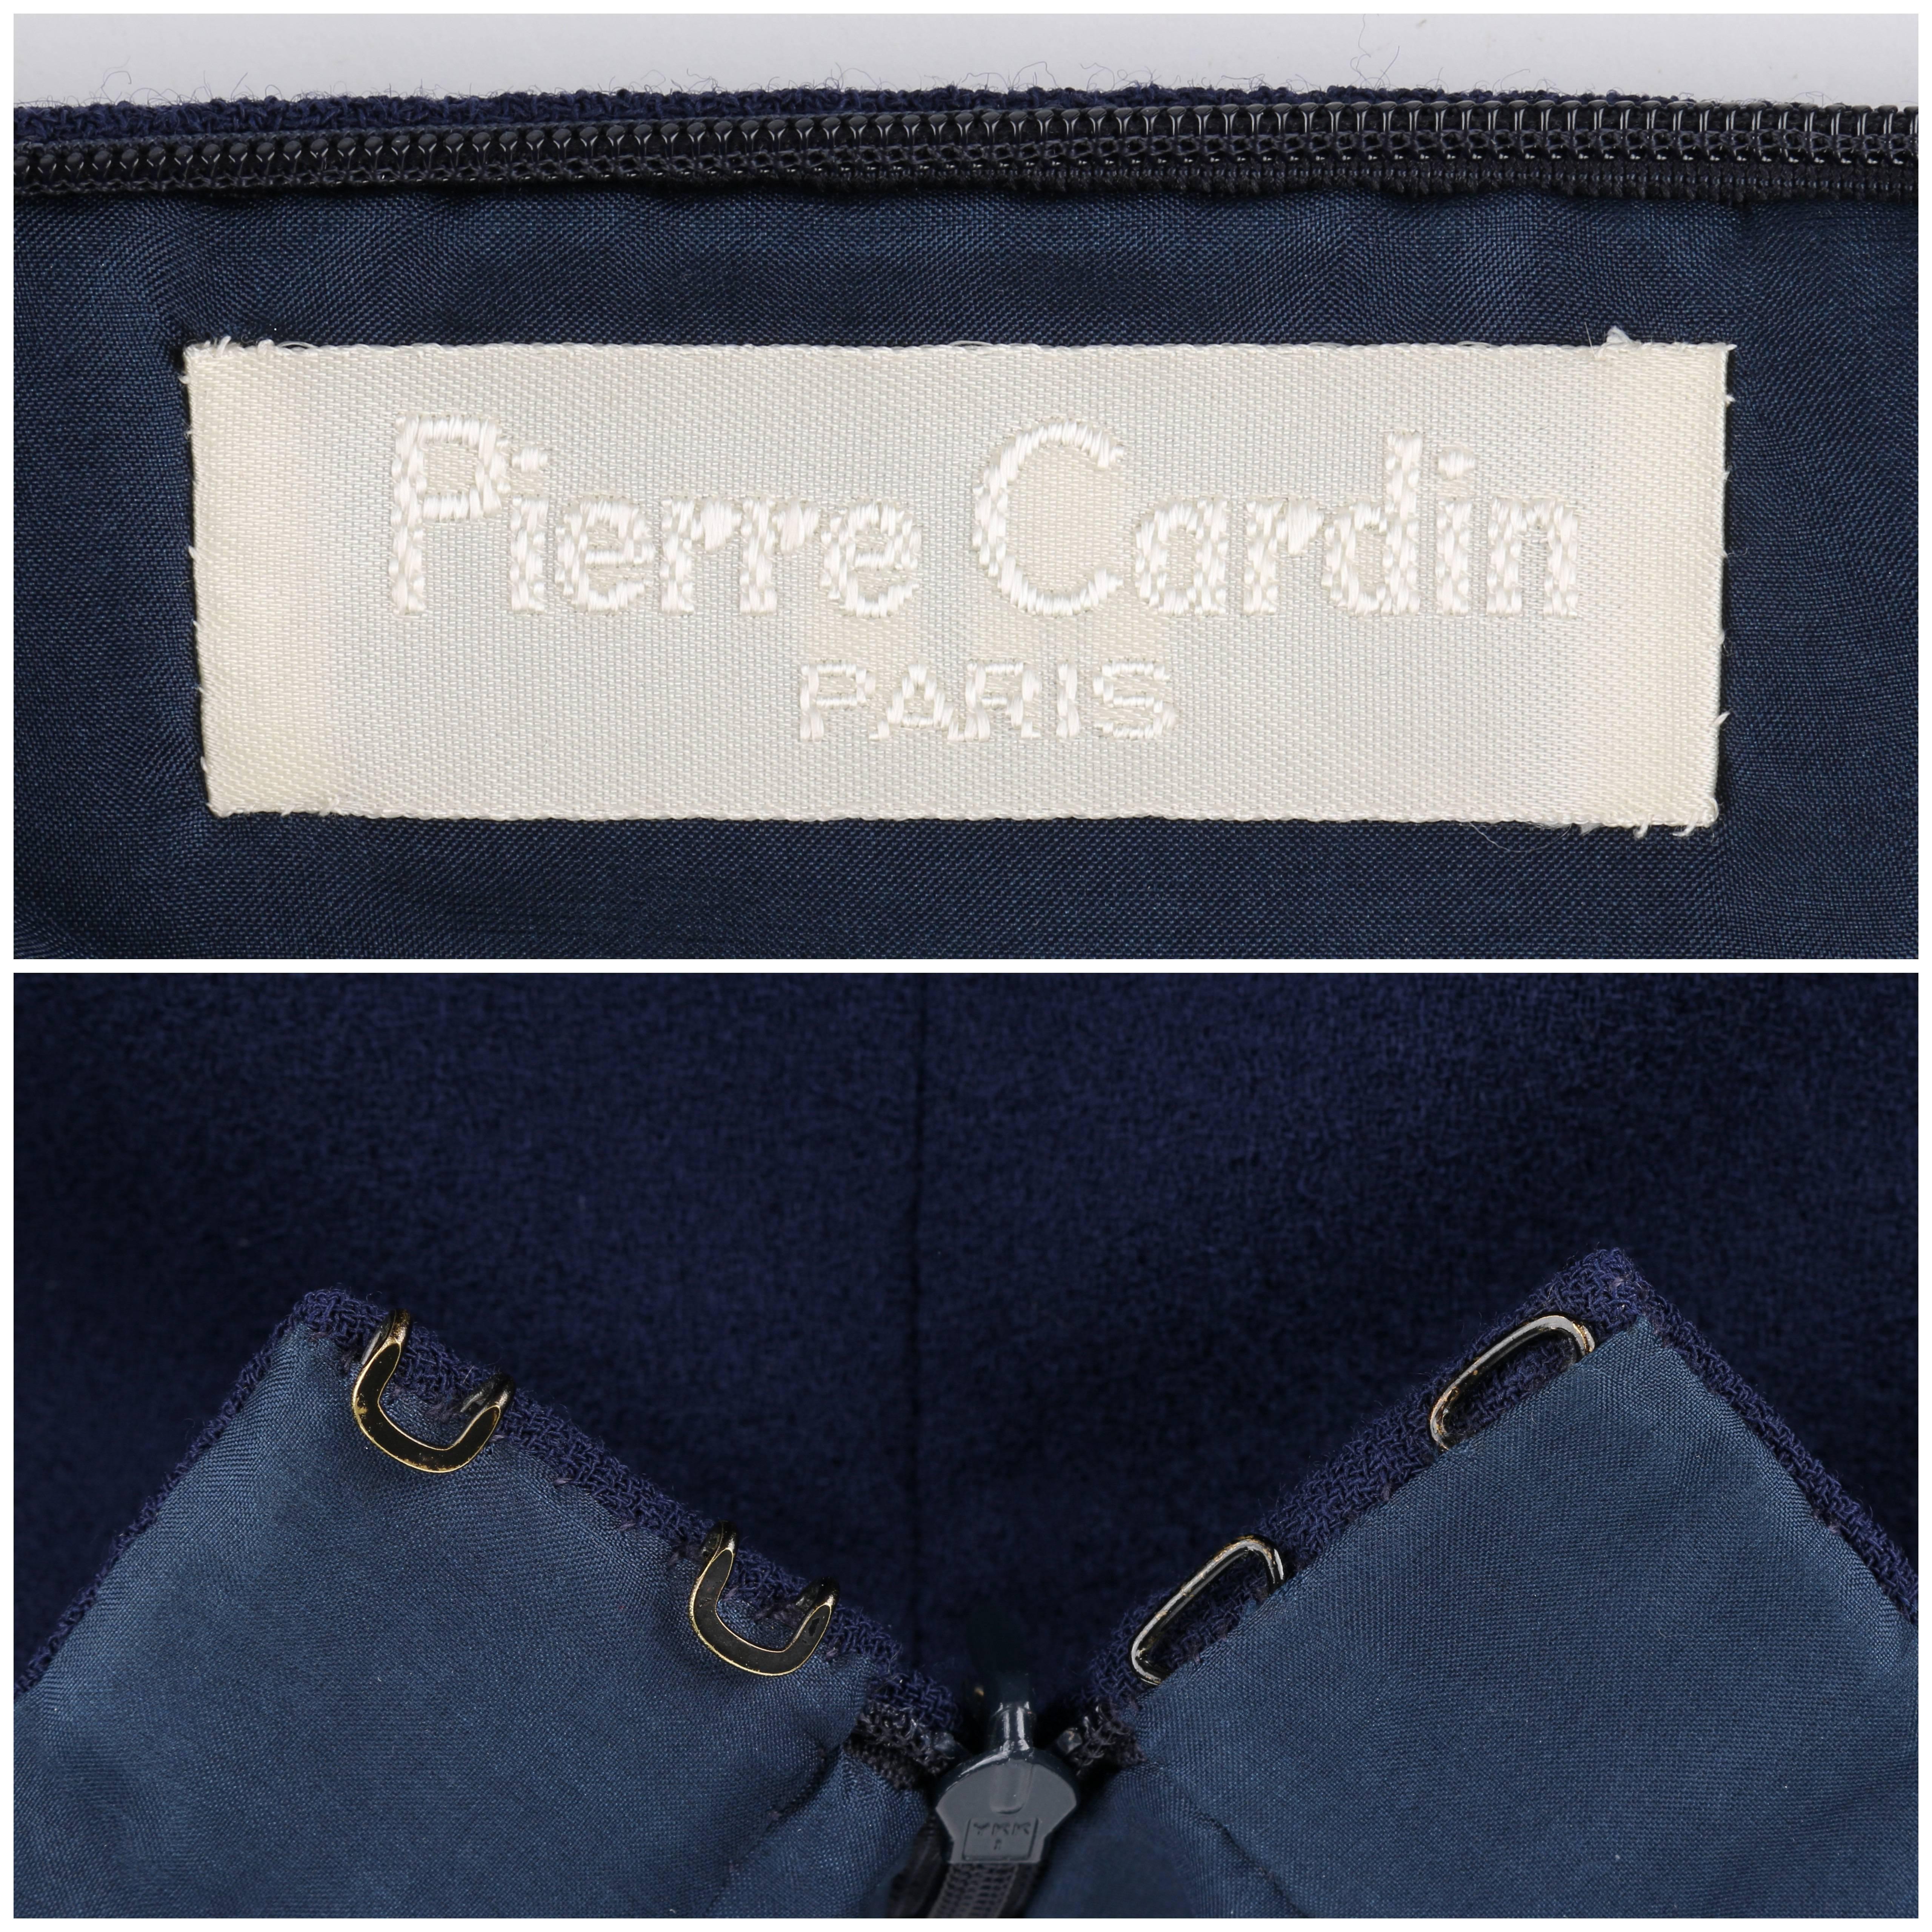 PIERRE CARDIN Haute Couture c.1990's Navy Blue Wool Pencil Skirt In Excellent Condition For Sale In Thiensville, WI